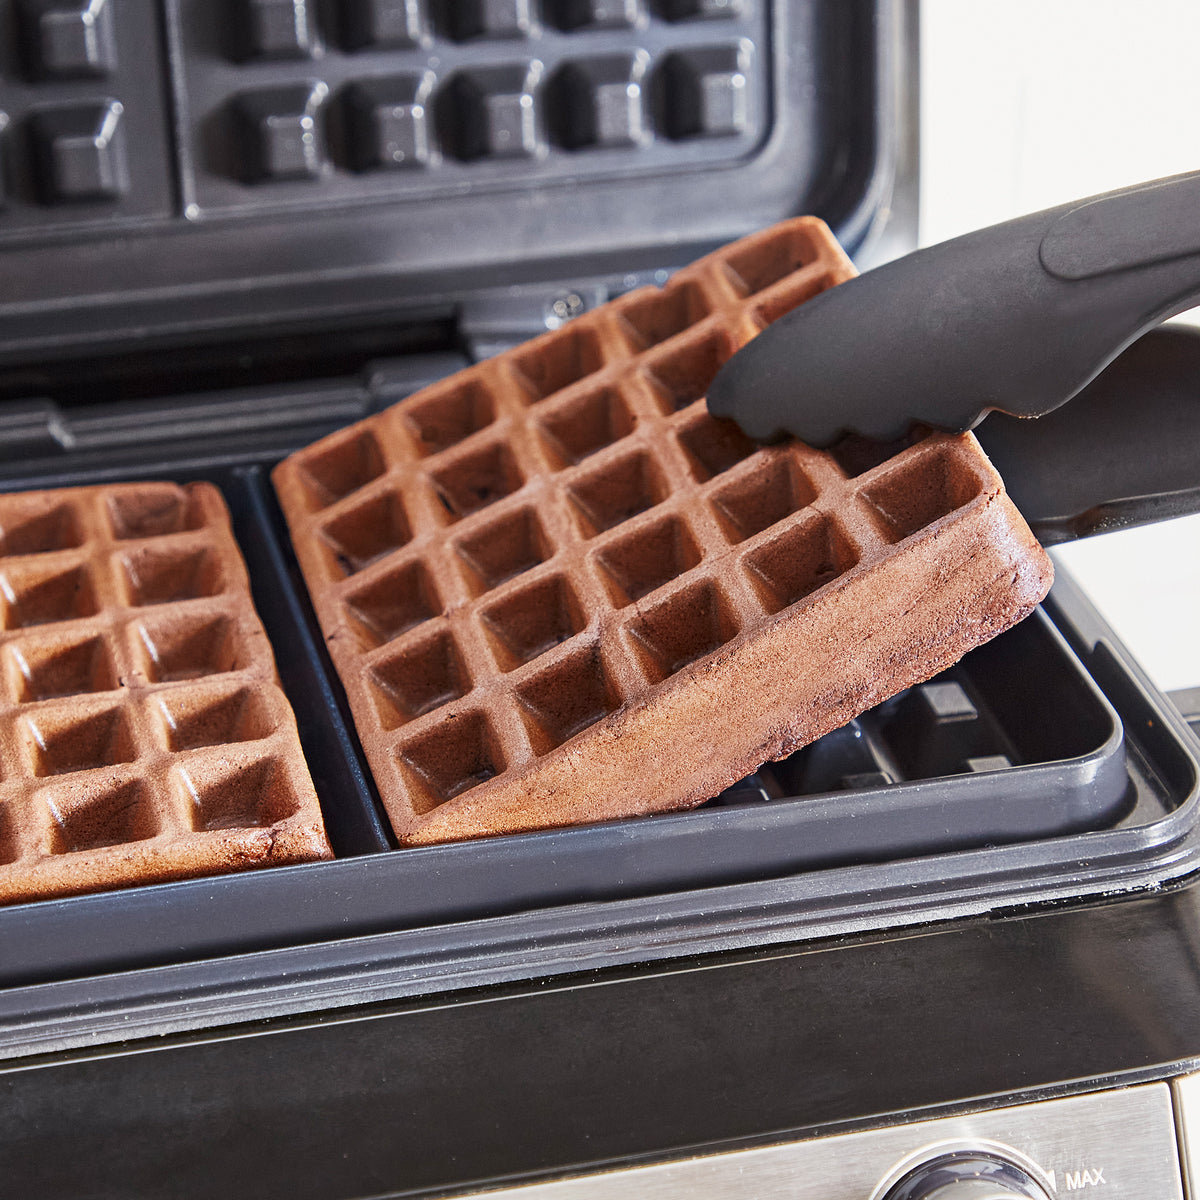 Six Simple Steps to Clean Your Waffle Maker